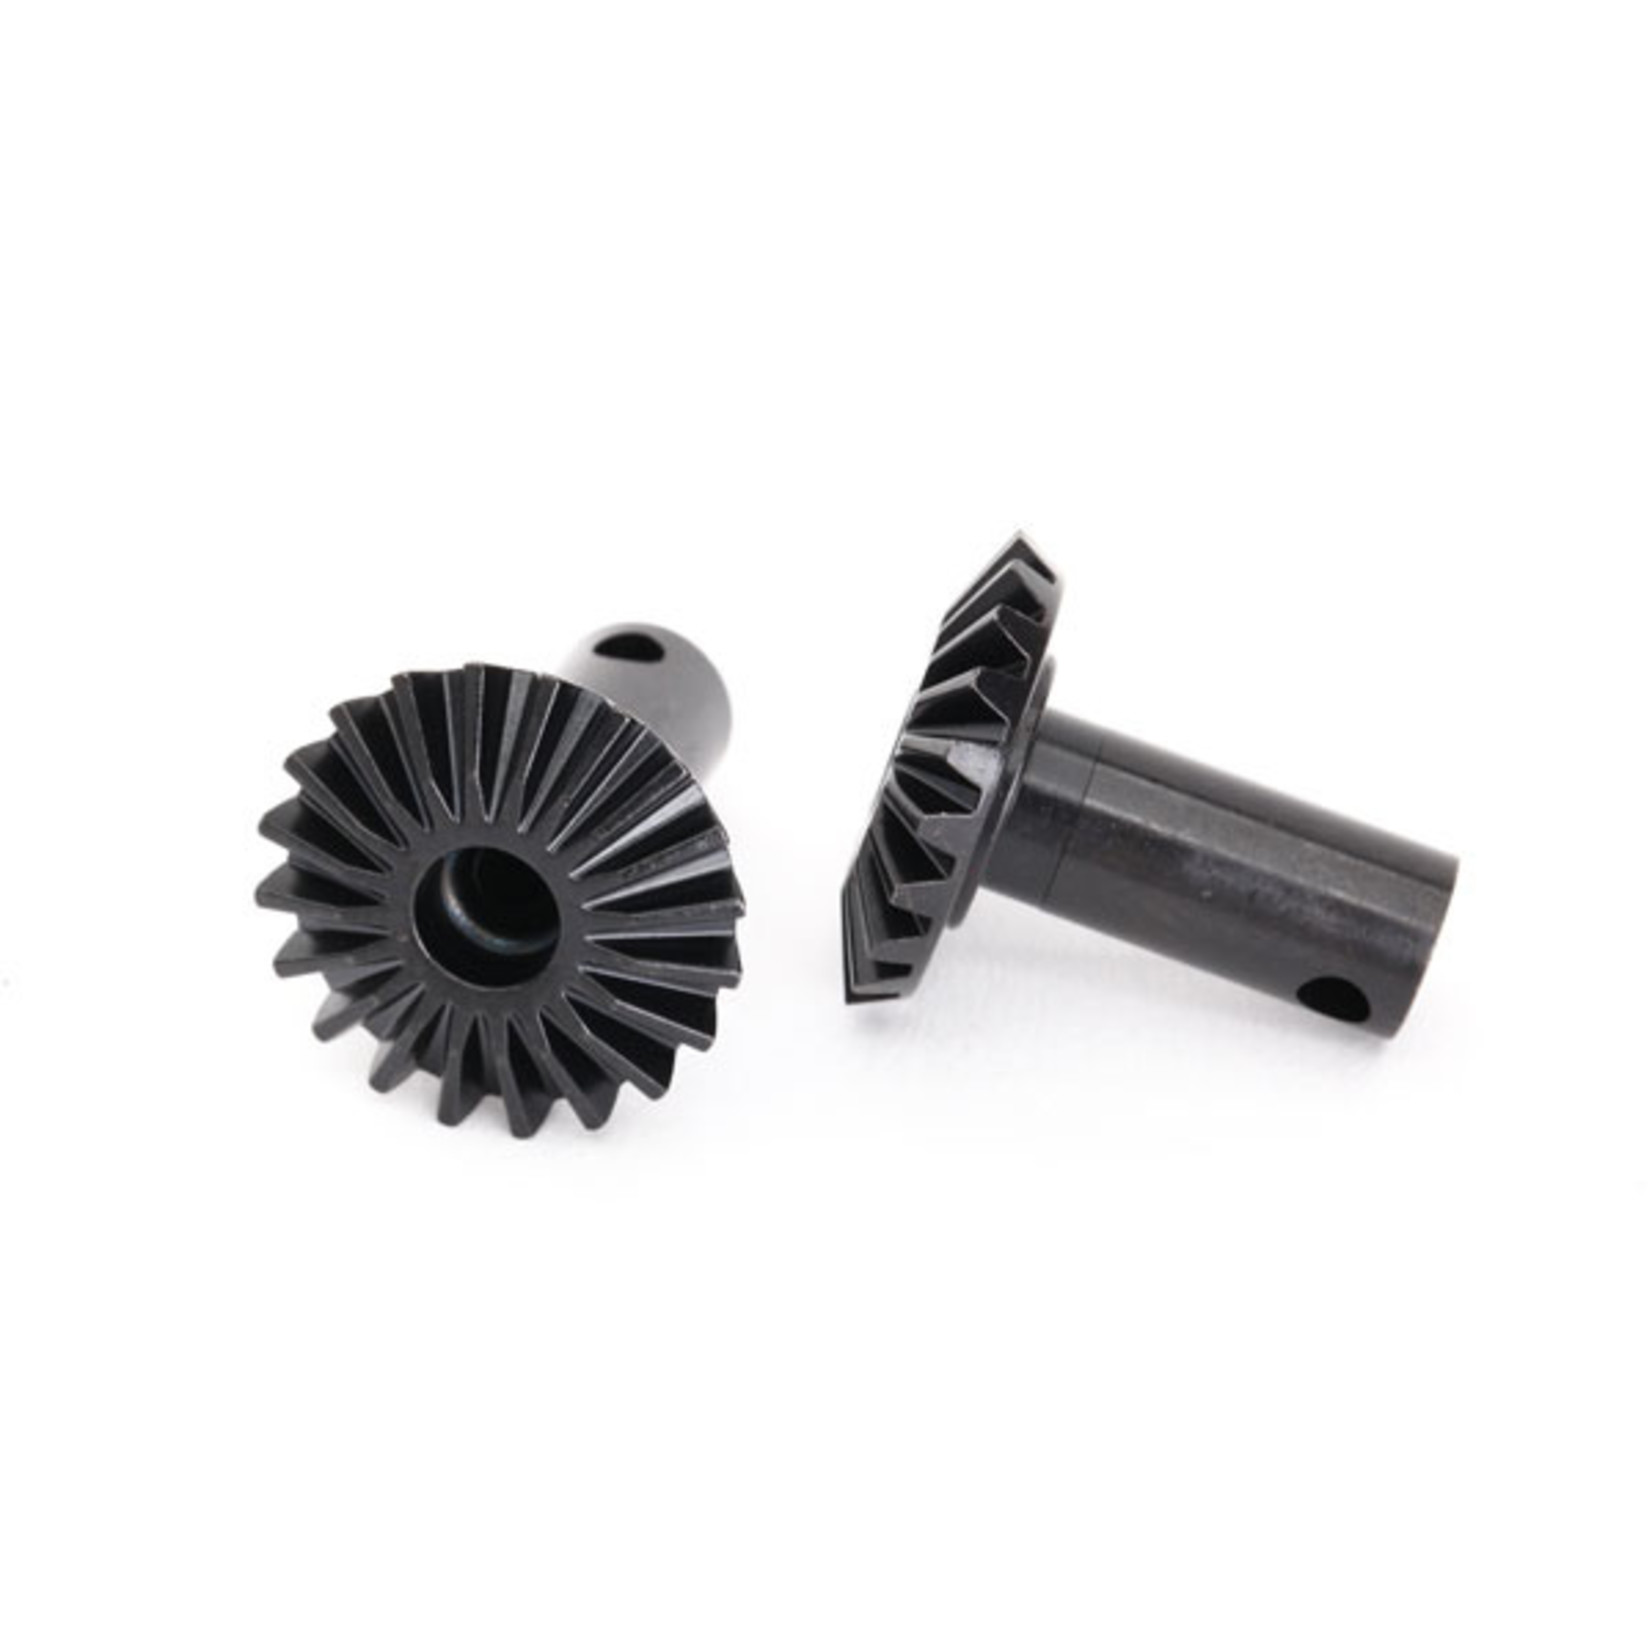 Traxxas 8683 - Output gears, differential, hardened steel